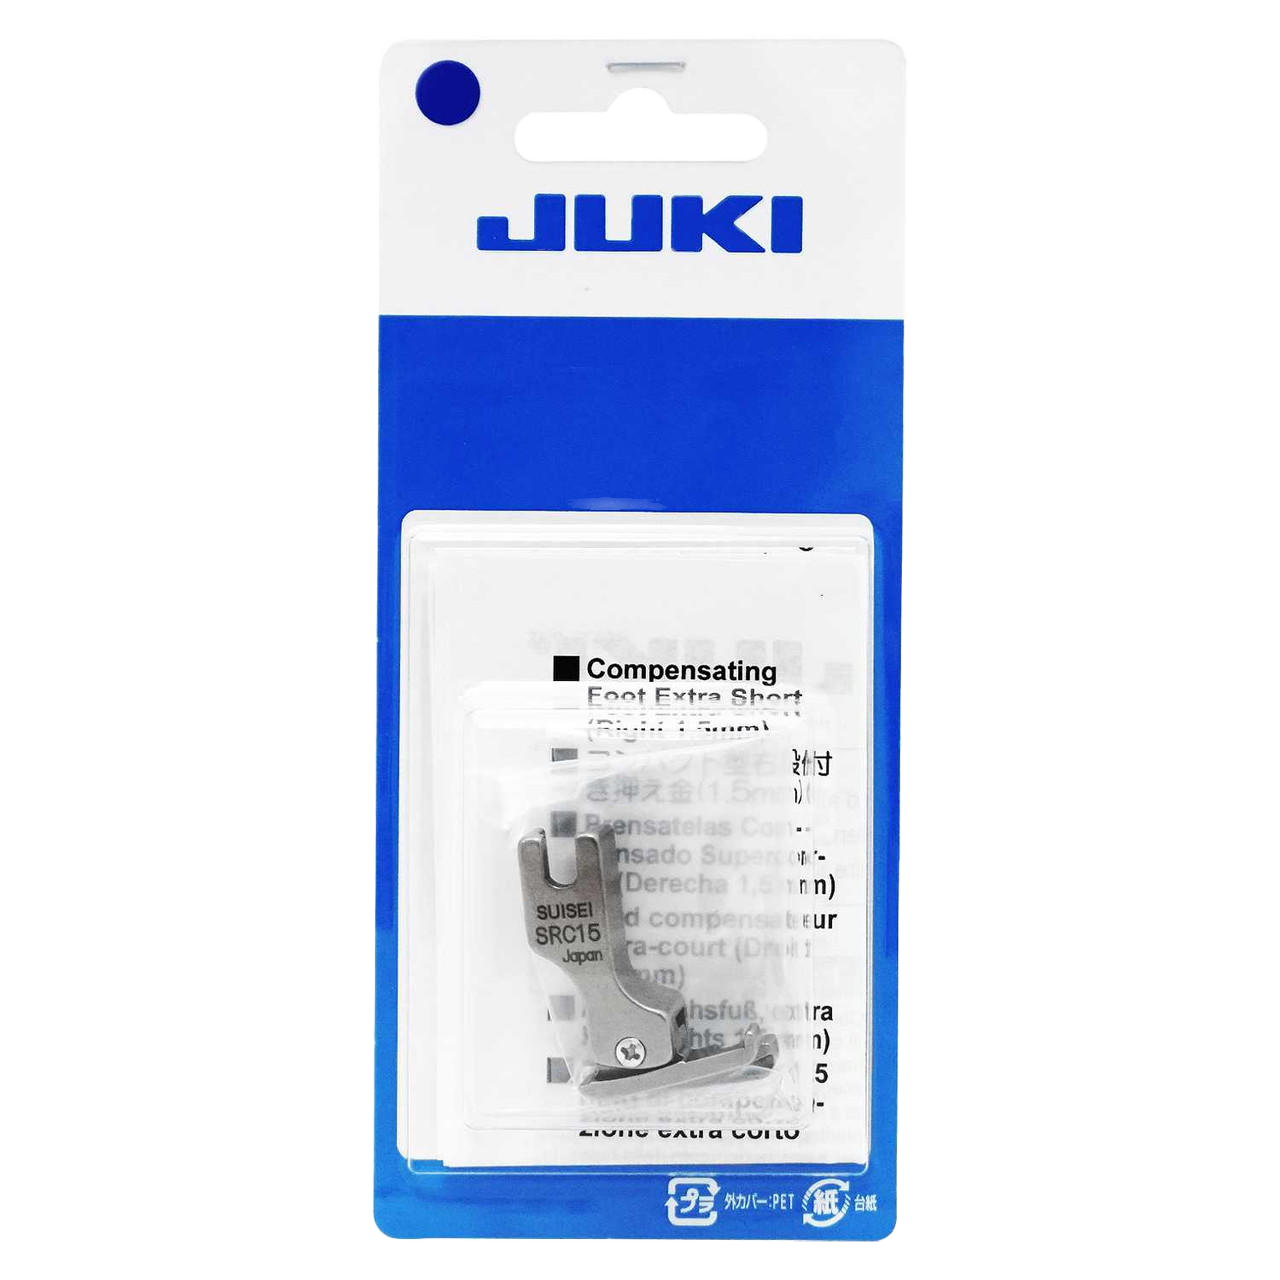 JUKI Extra Short Compensating Foot for TL Series 40233377 for Sale at World Weidner